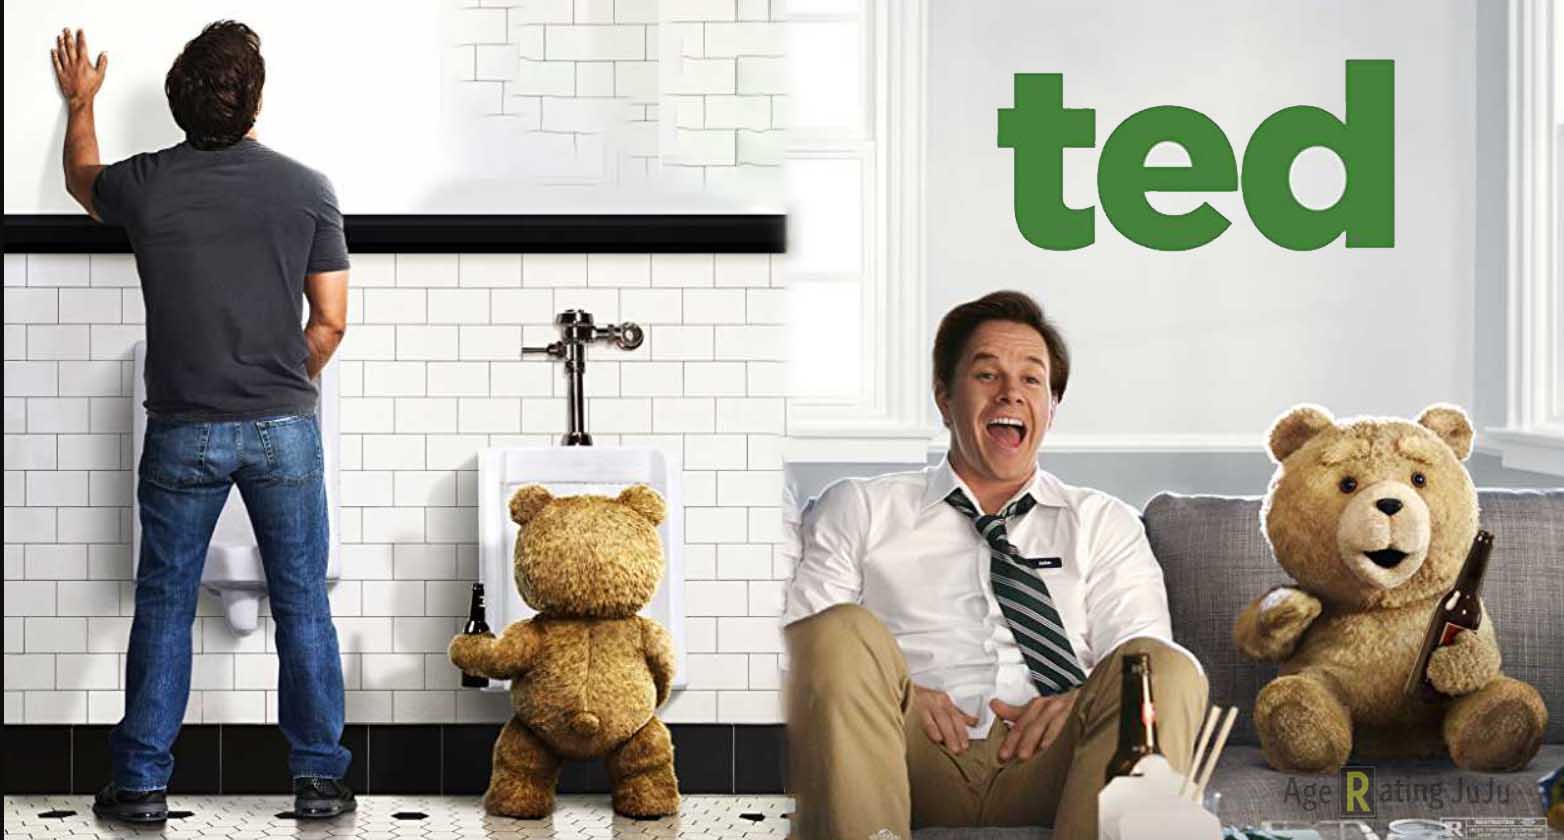 Ted Age Rating 2012 - Movie Poster Images and Wallpapers